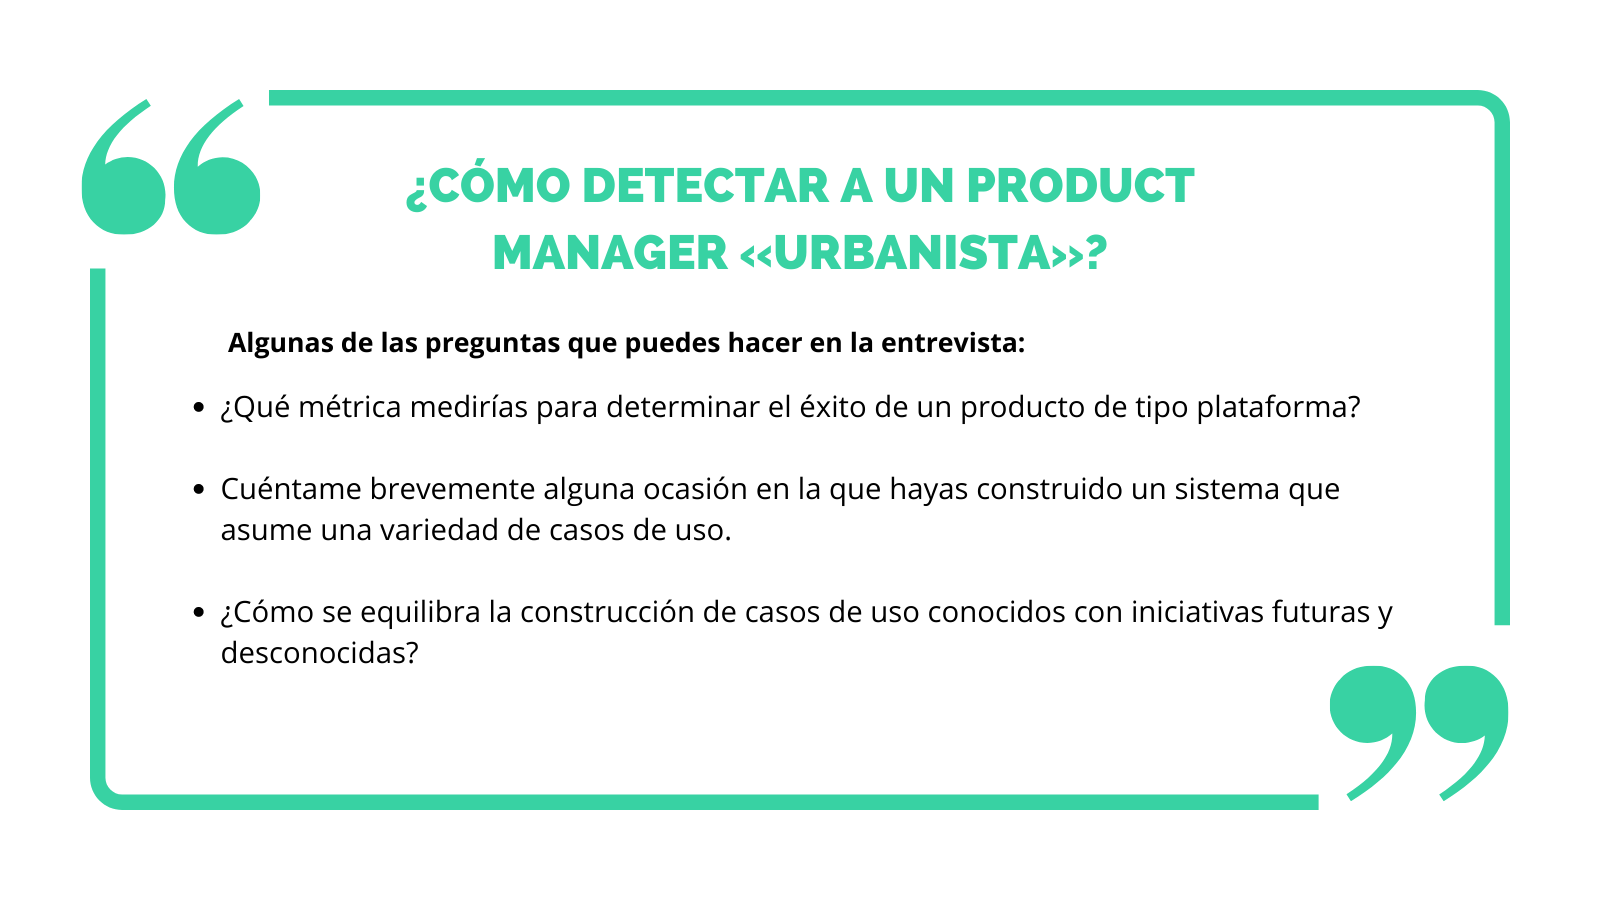 detectar a un product manager urbanista